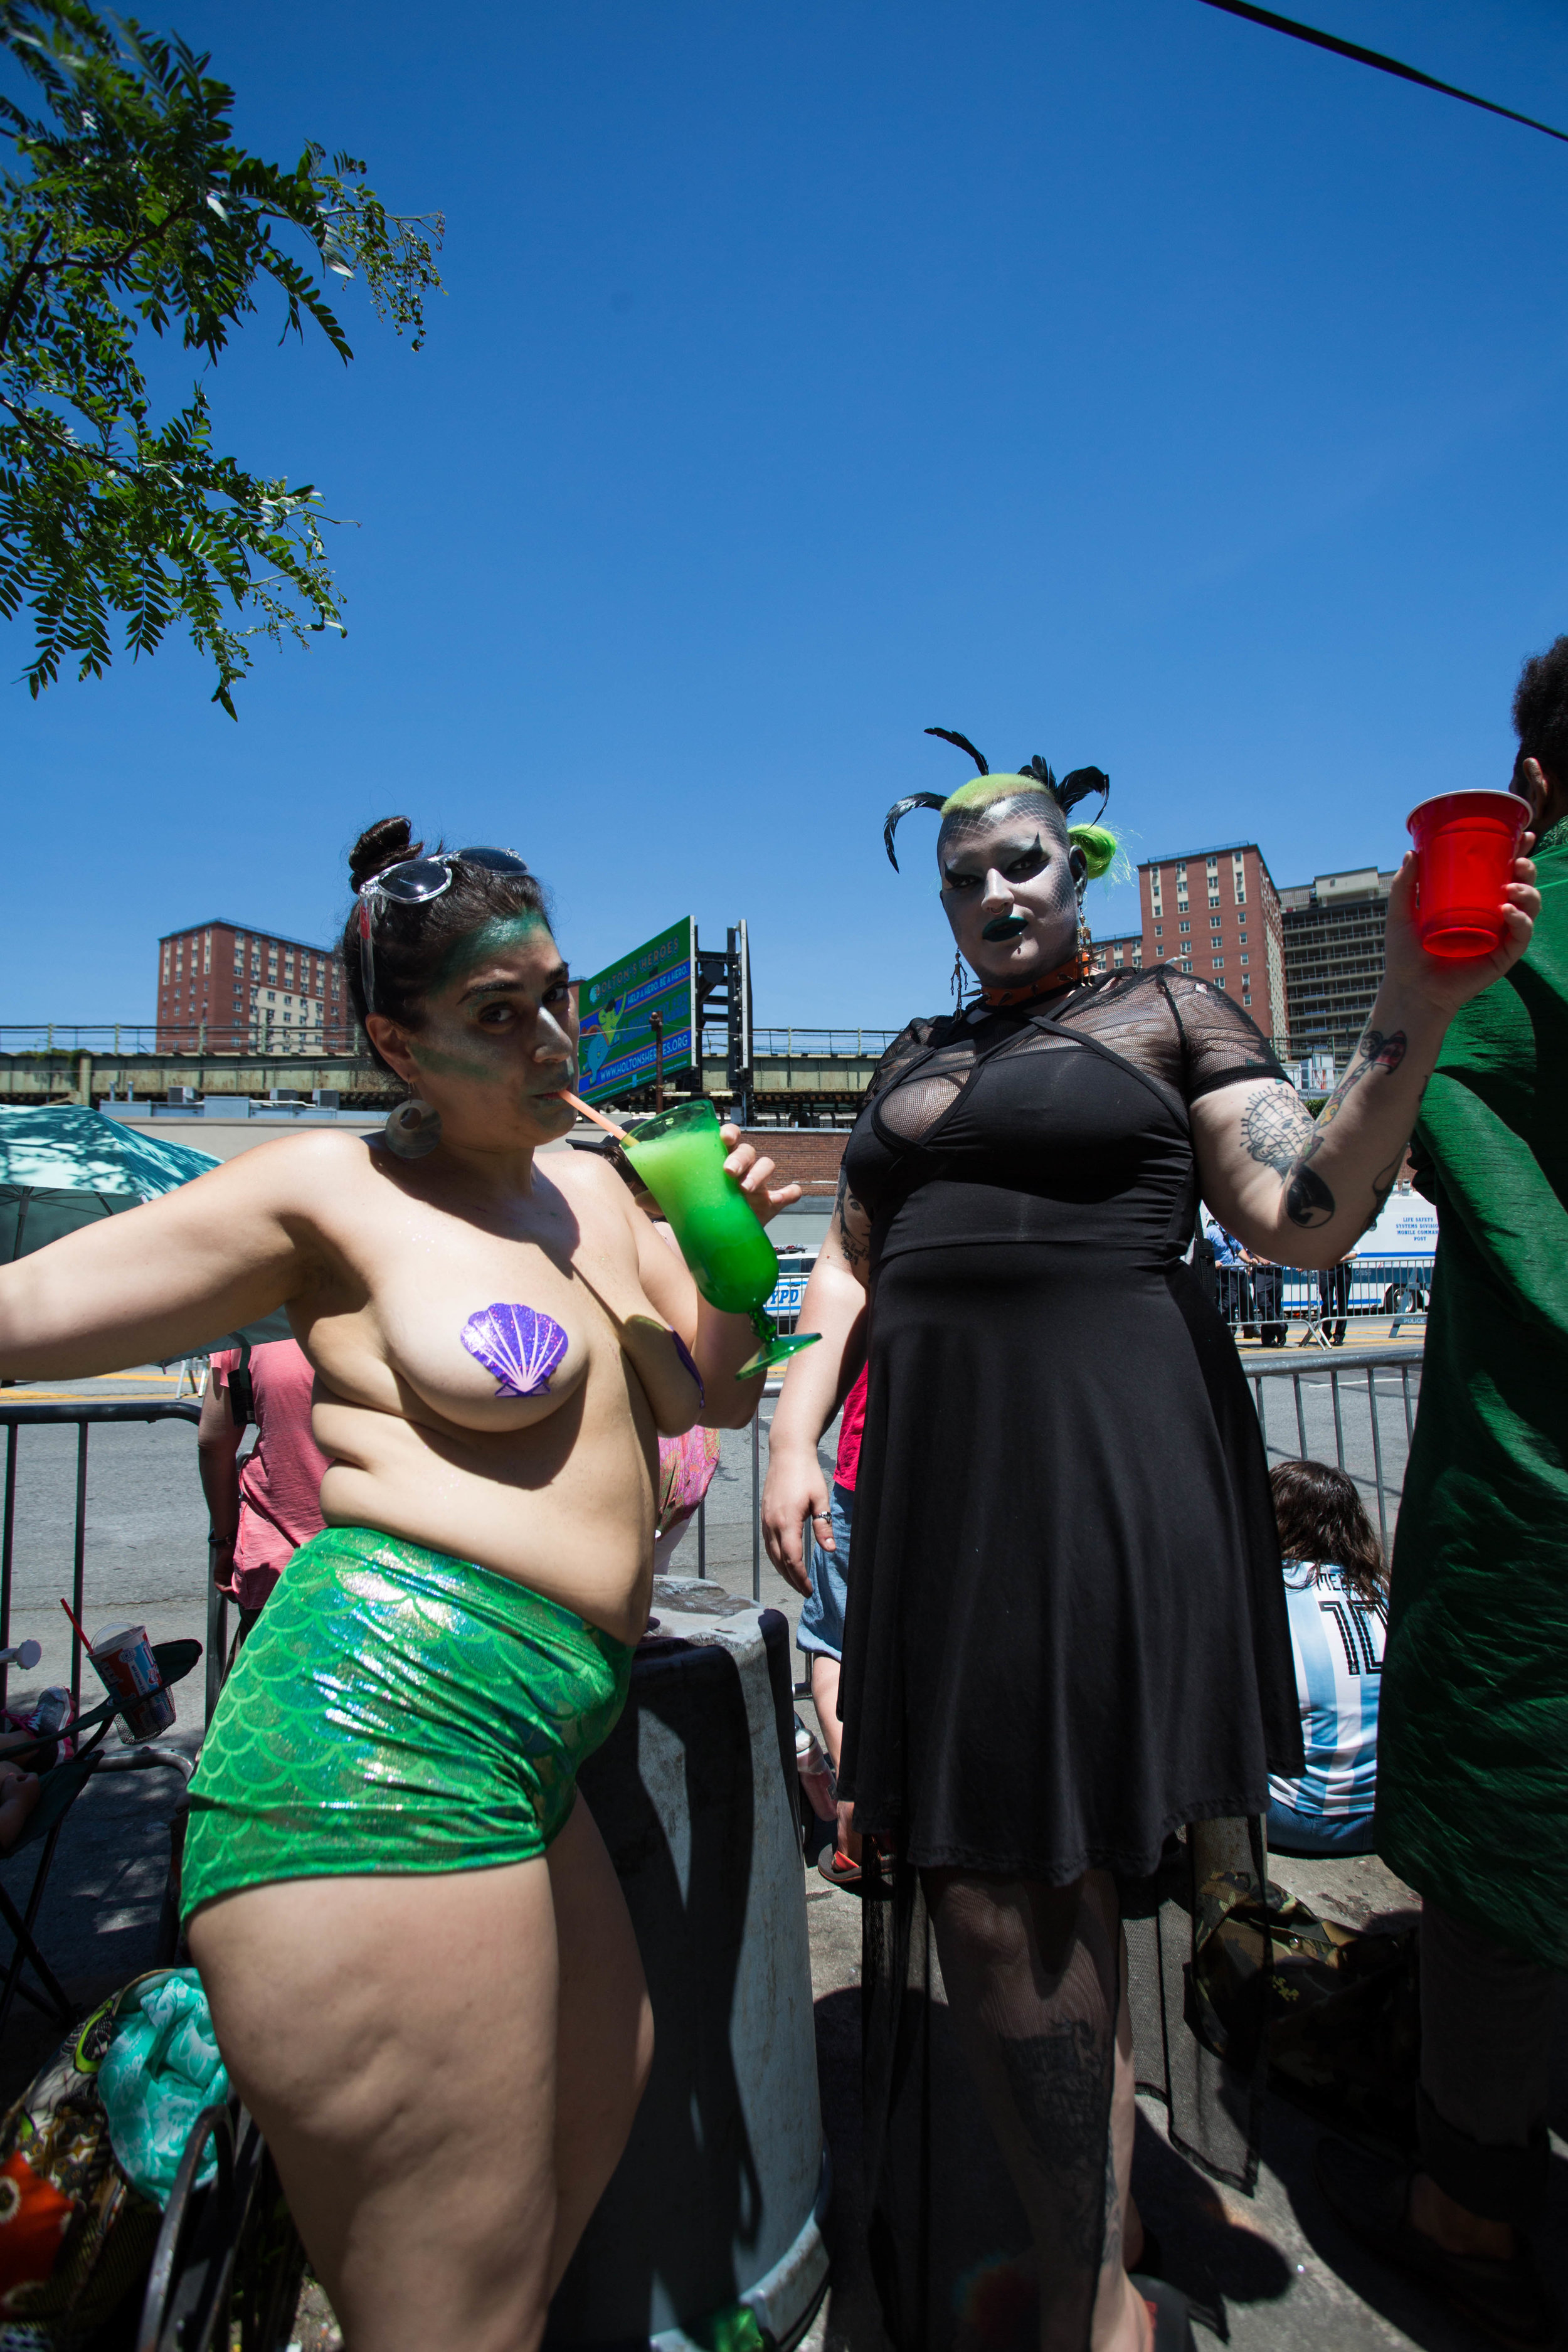  Mermaids and spectators attending Coney Island's 36th anual Mermaid Day Parade, on Saturday June 16, in New York. Photo: Wes Parnell 